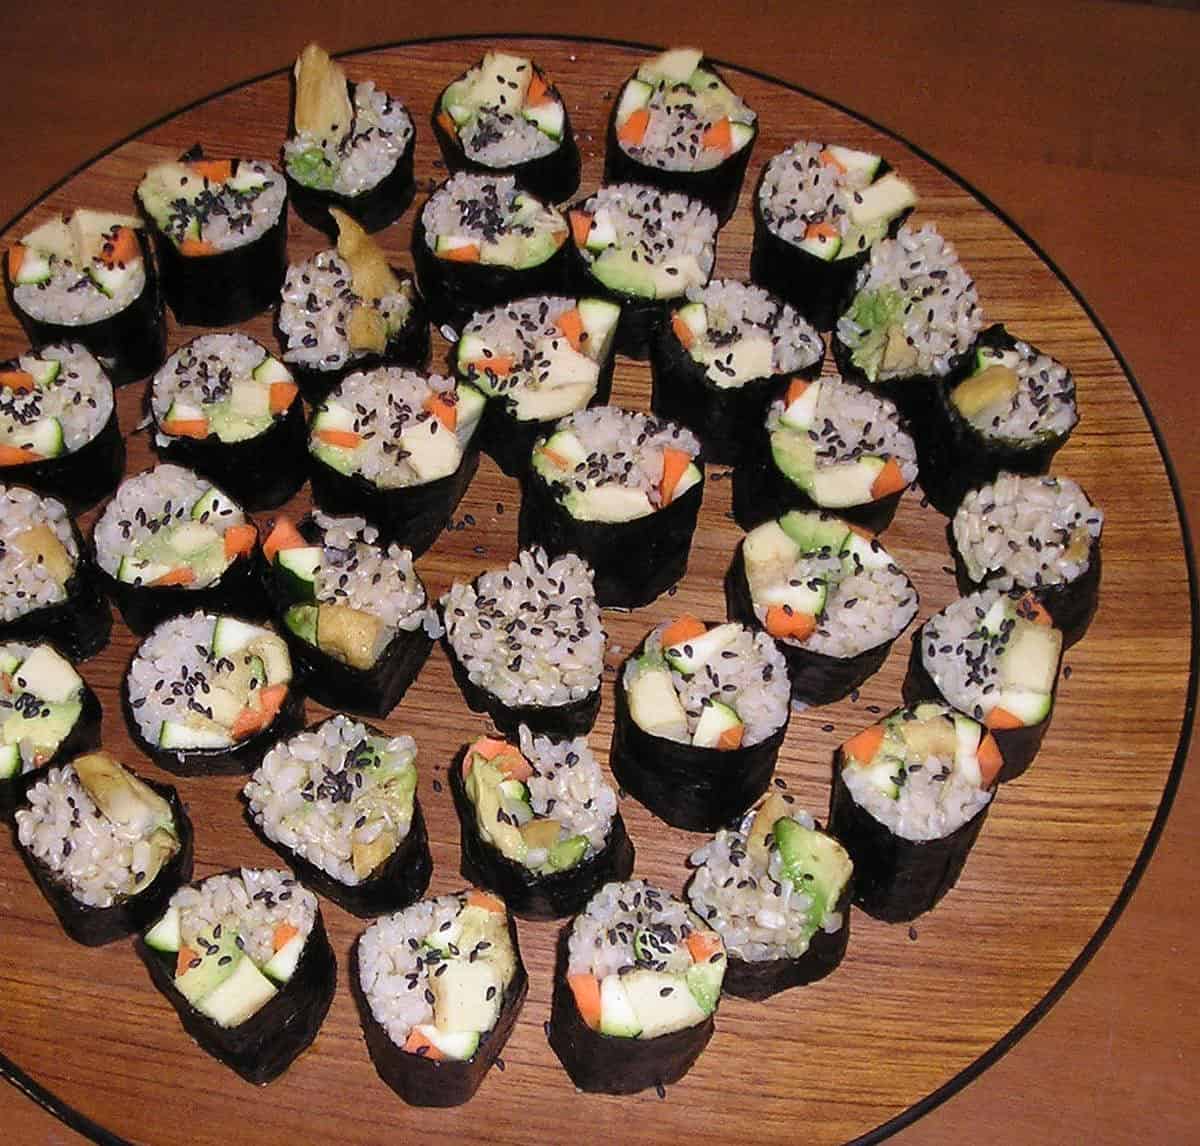  Taking a bite of these vegan sushi rolls is like taking a bite out of Japan!